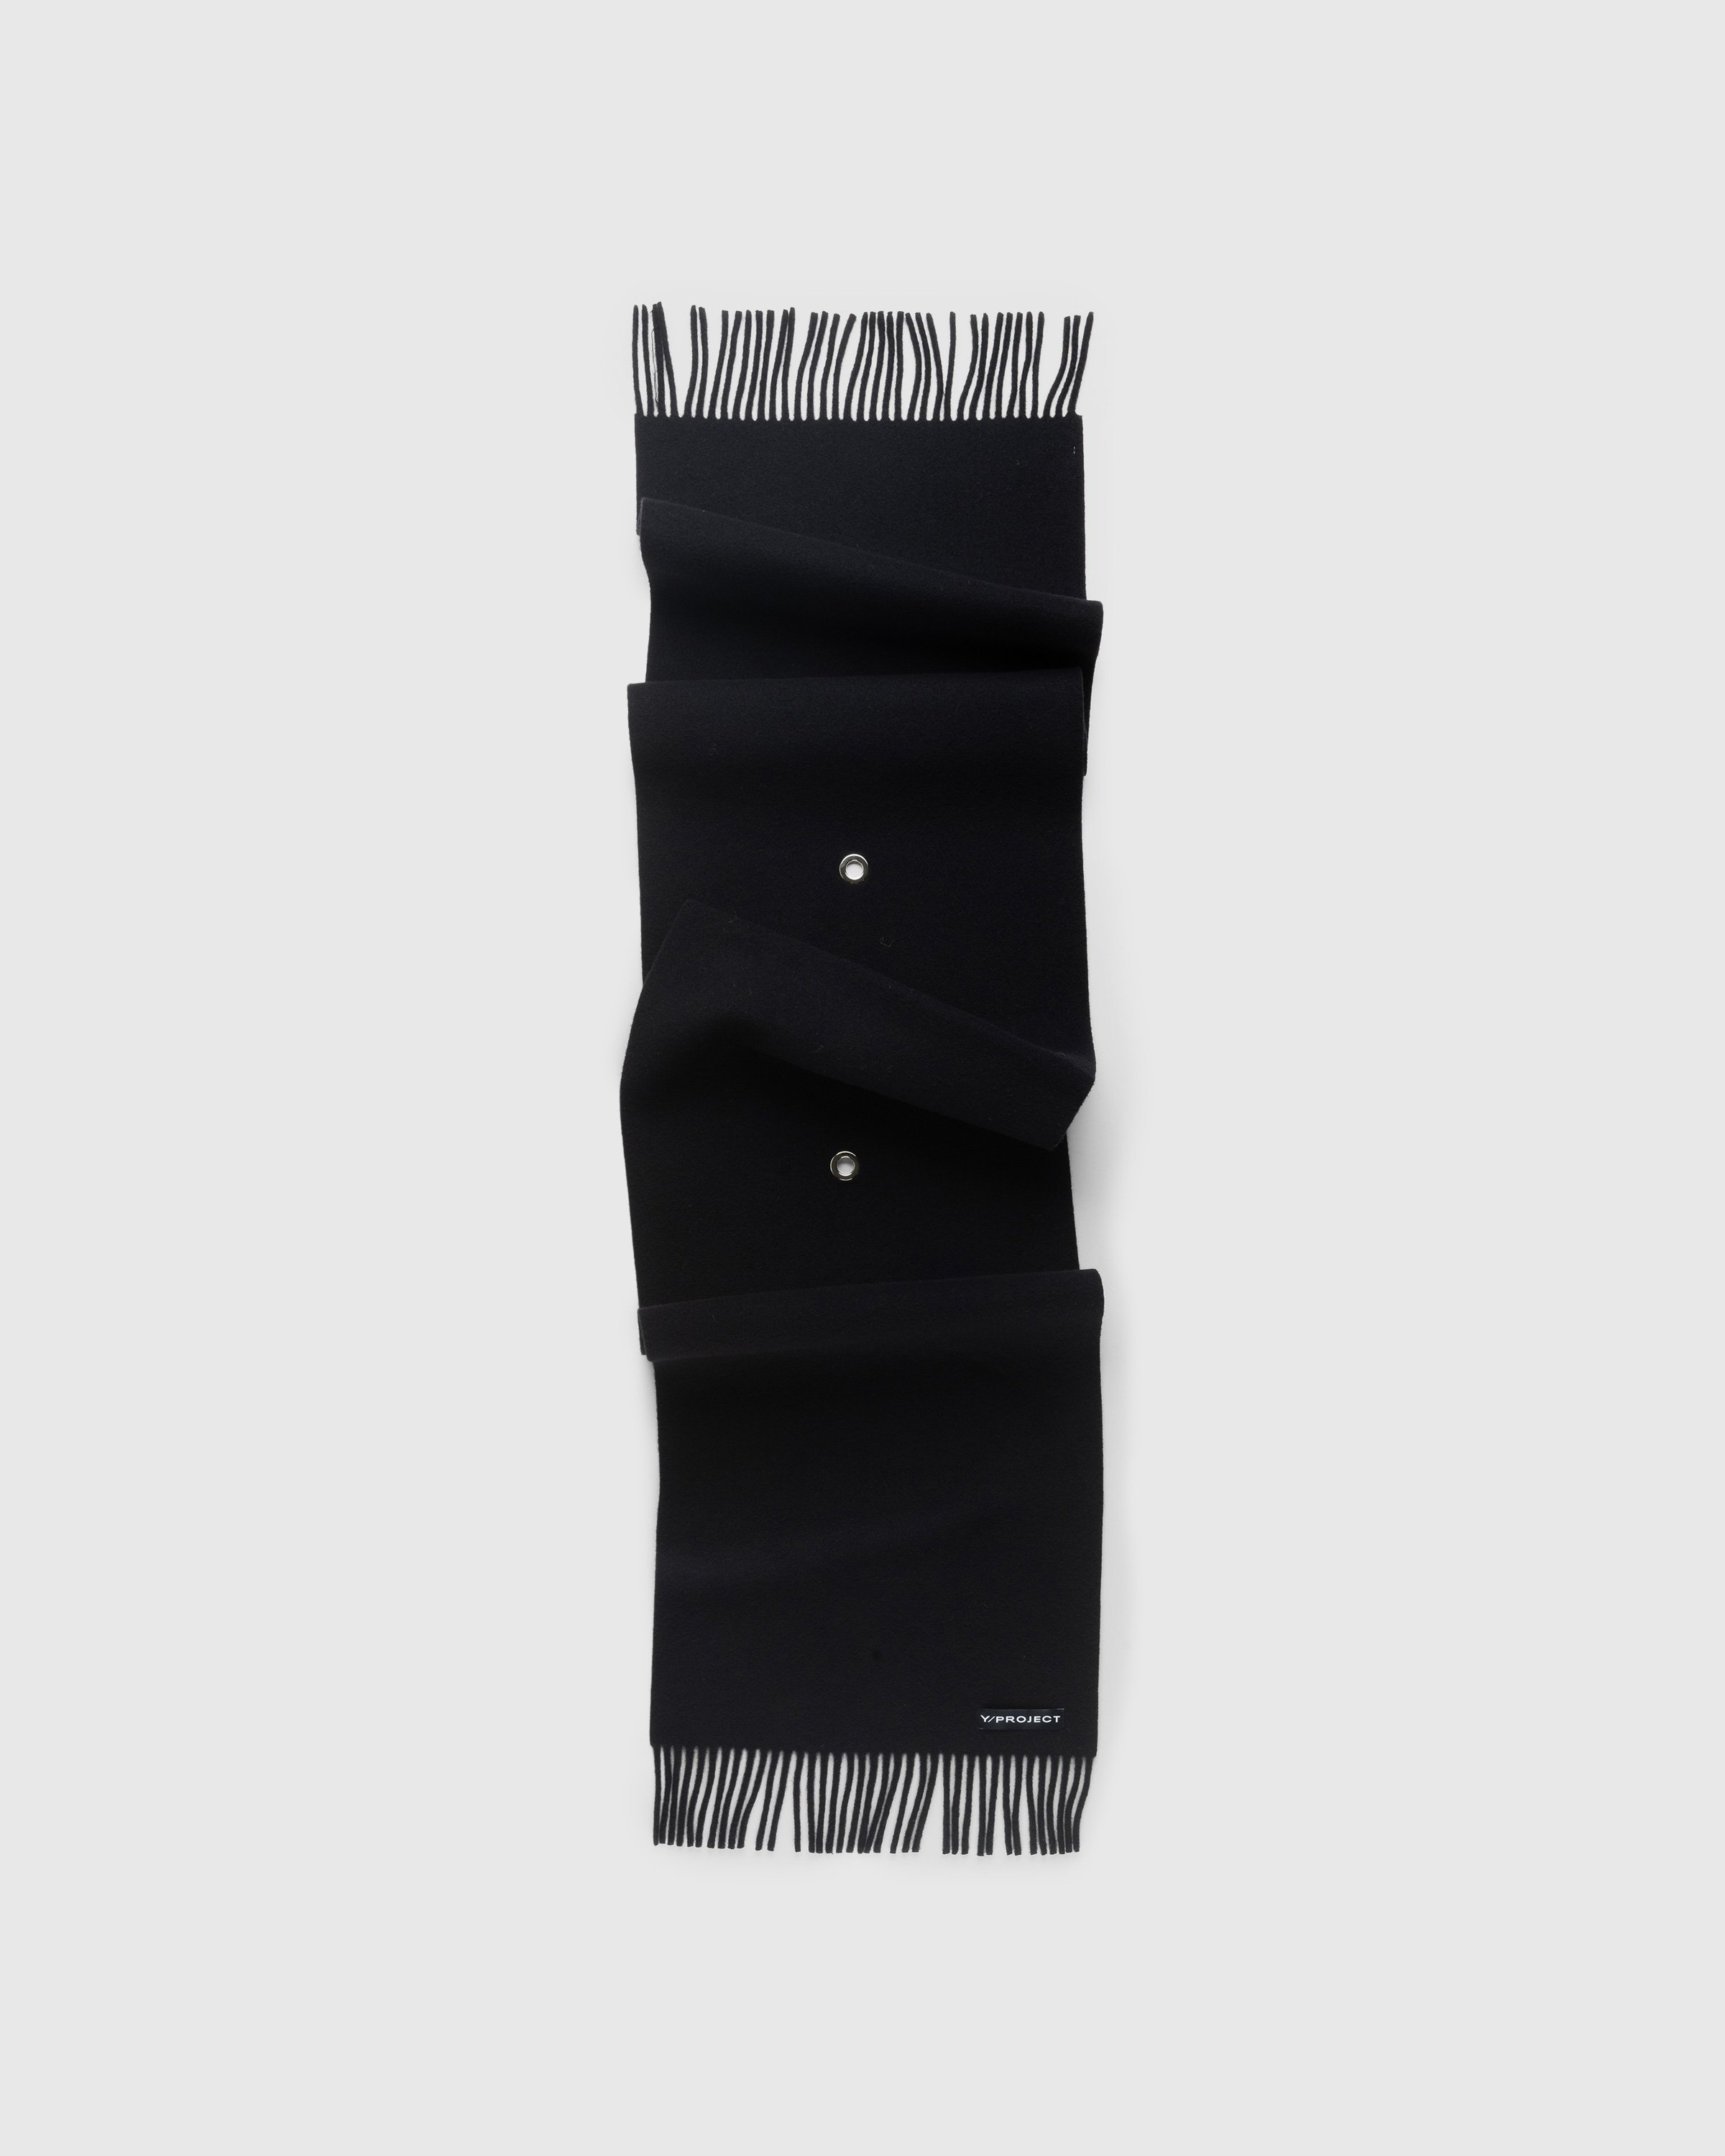 Y/Project – Chain Scarf Black/Silver - Scarves - Black - Image 1